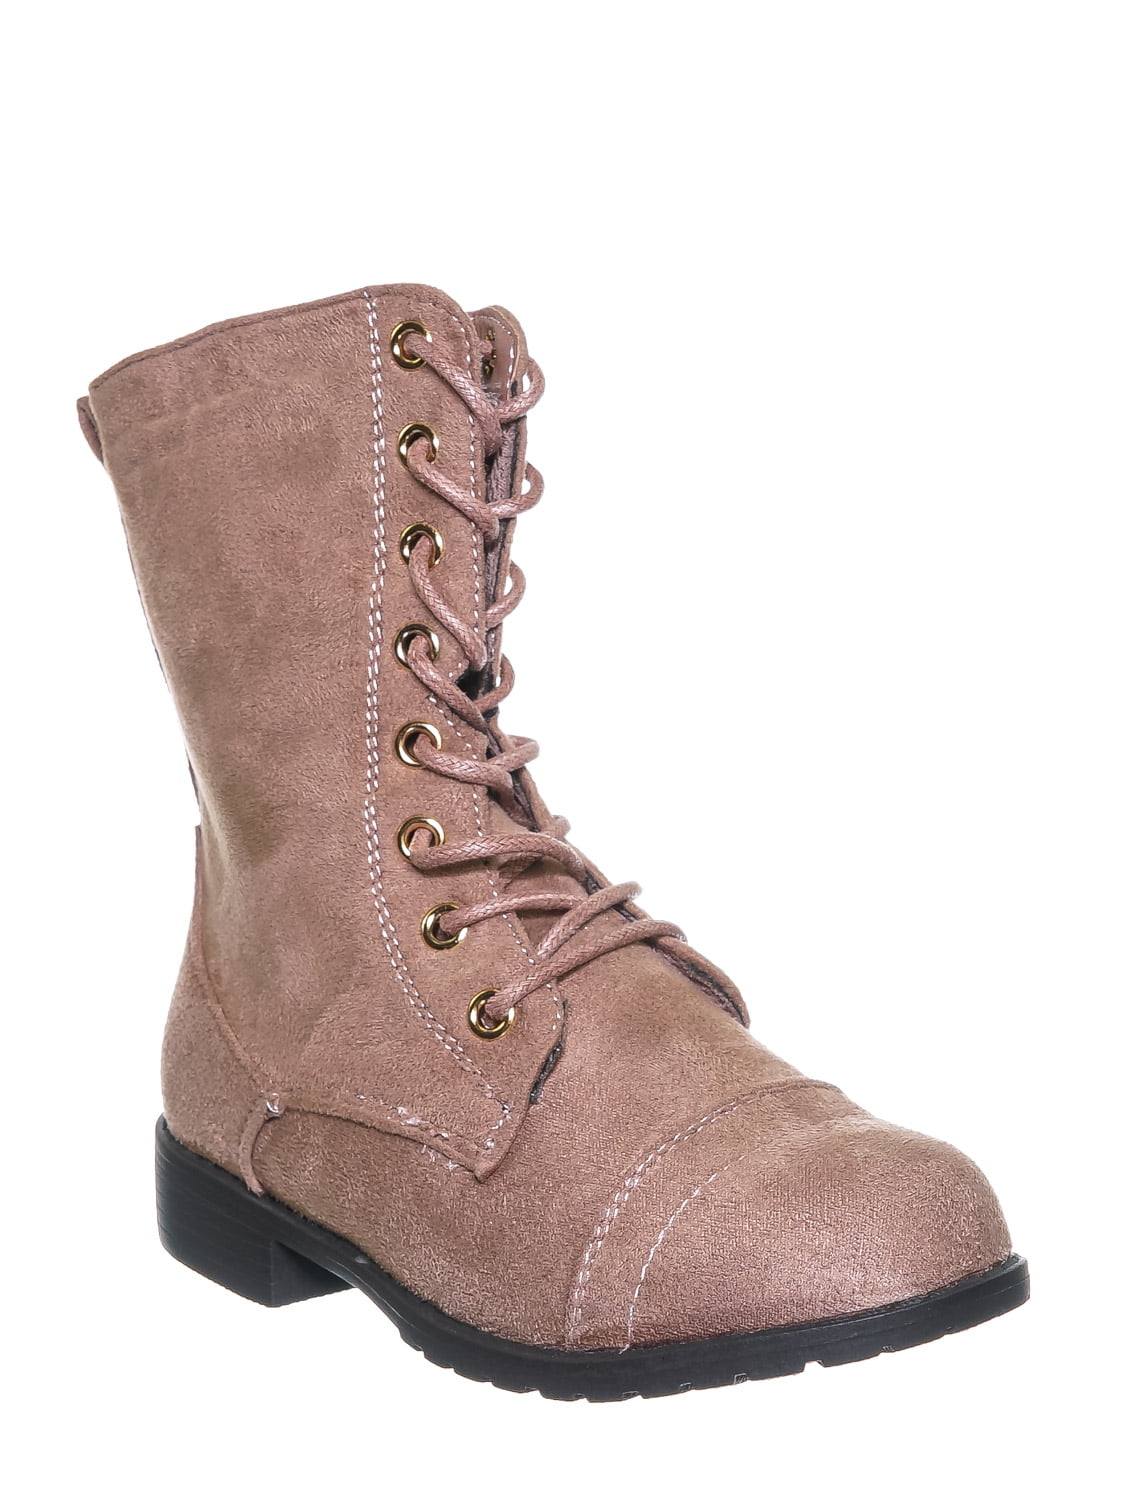 Little Girls Youth Ankle Combat Boots Fold Over Tall Military Mid Calf Booties 